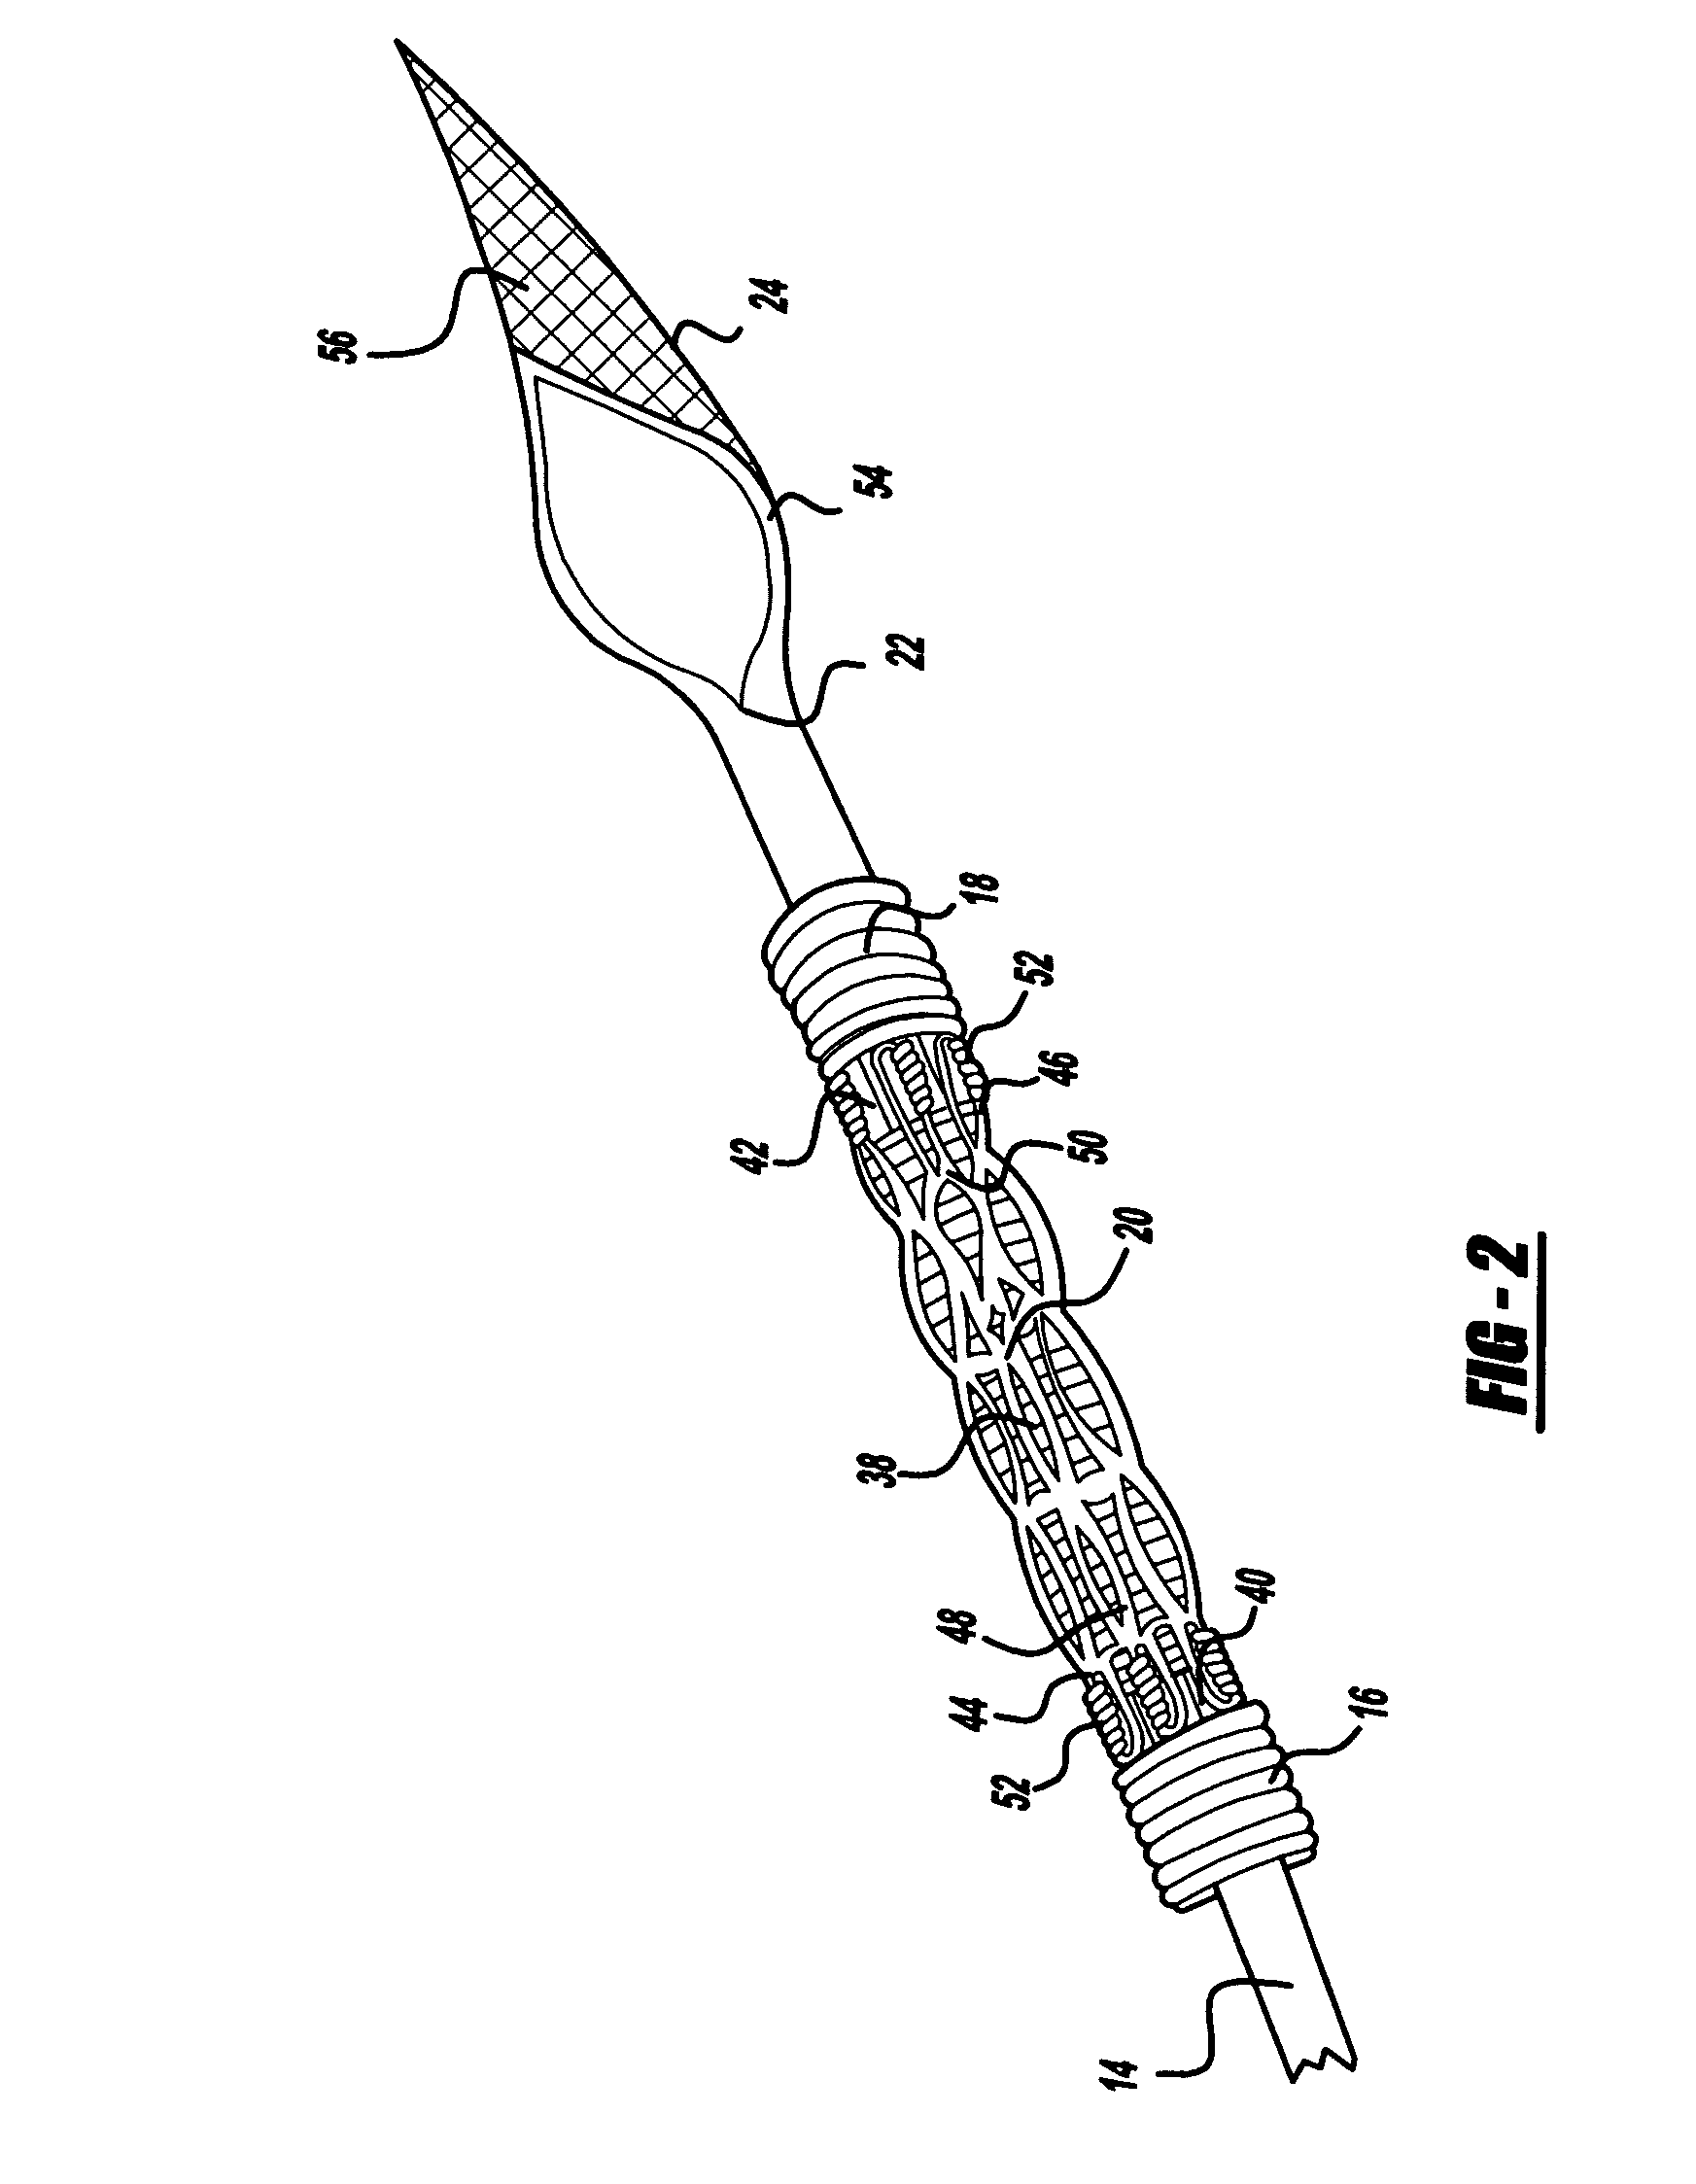 Self-expanding stent and stent delivery system with distal protection